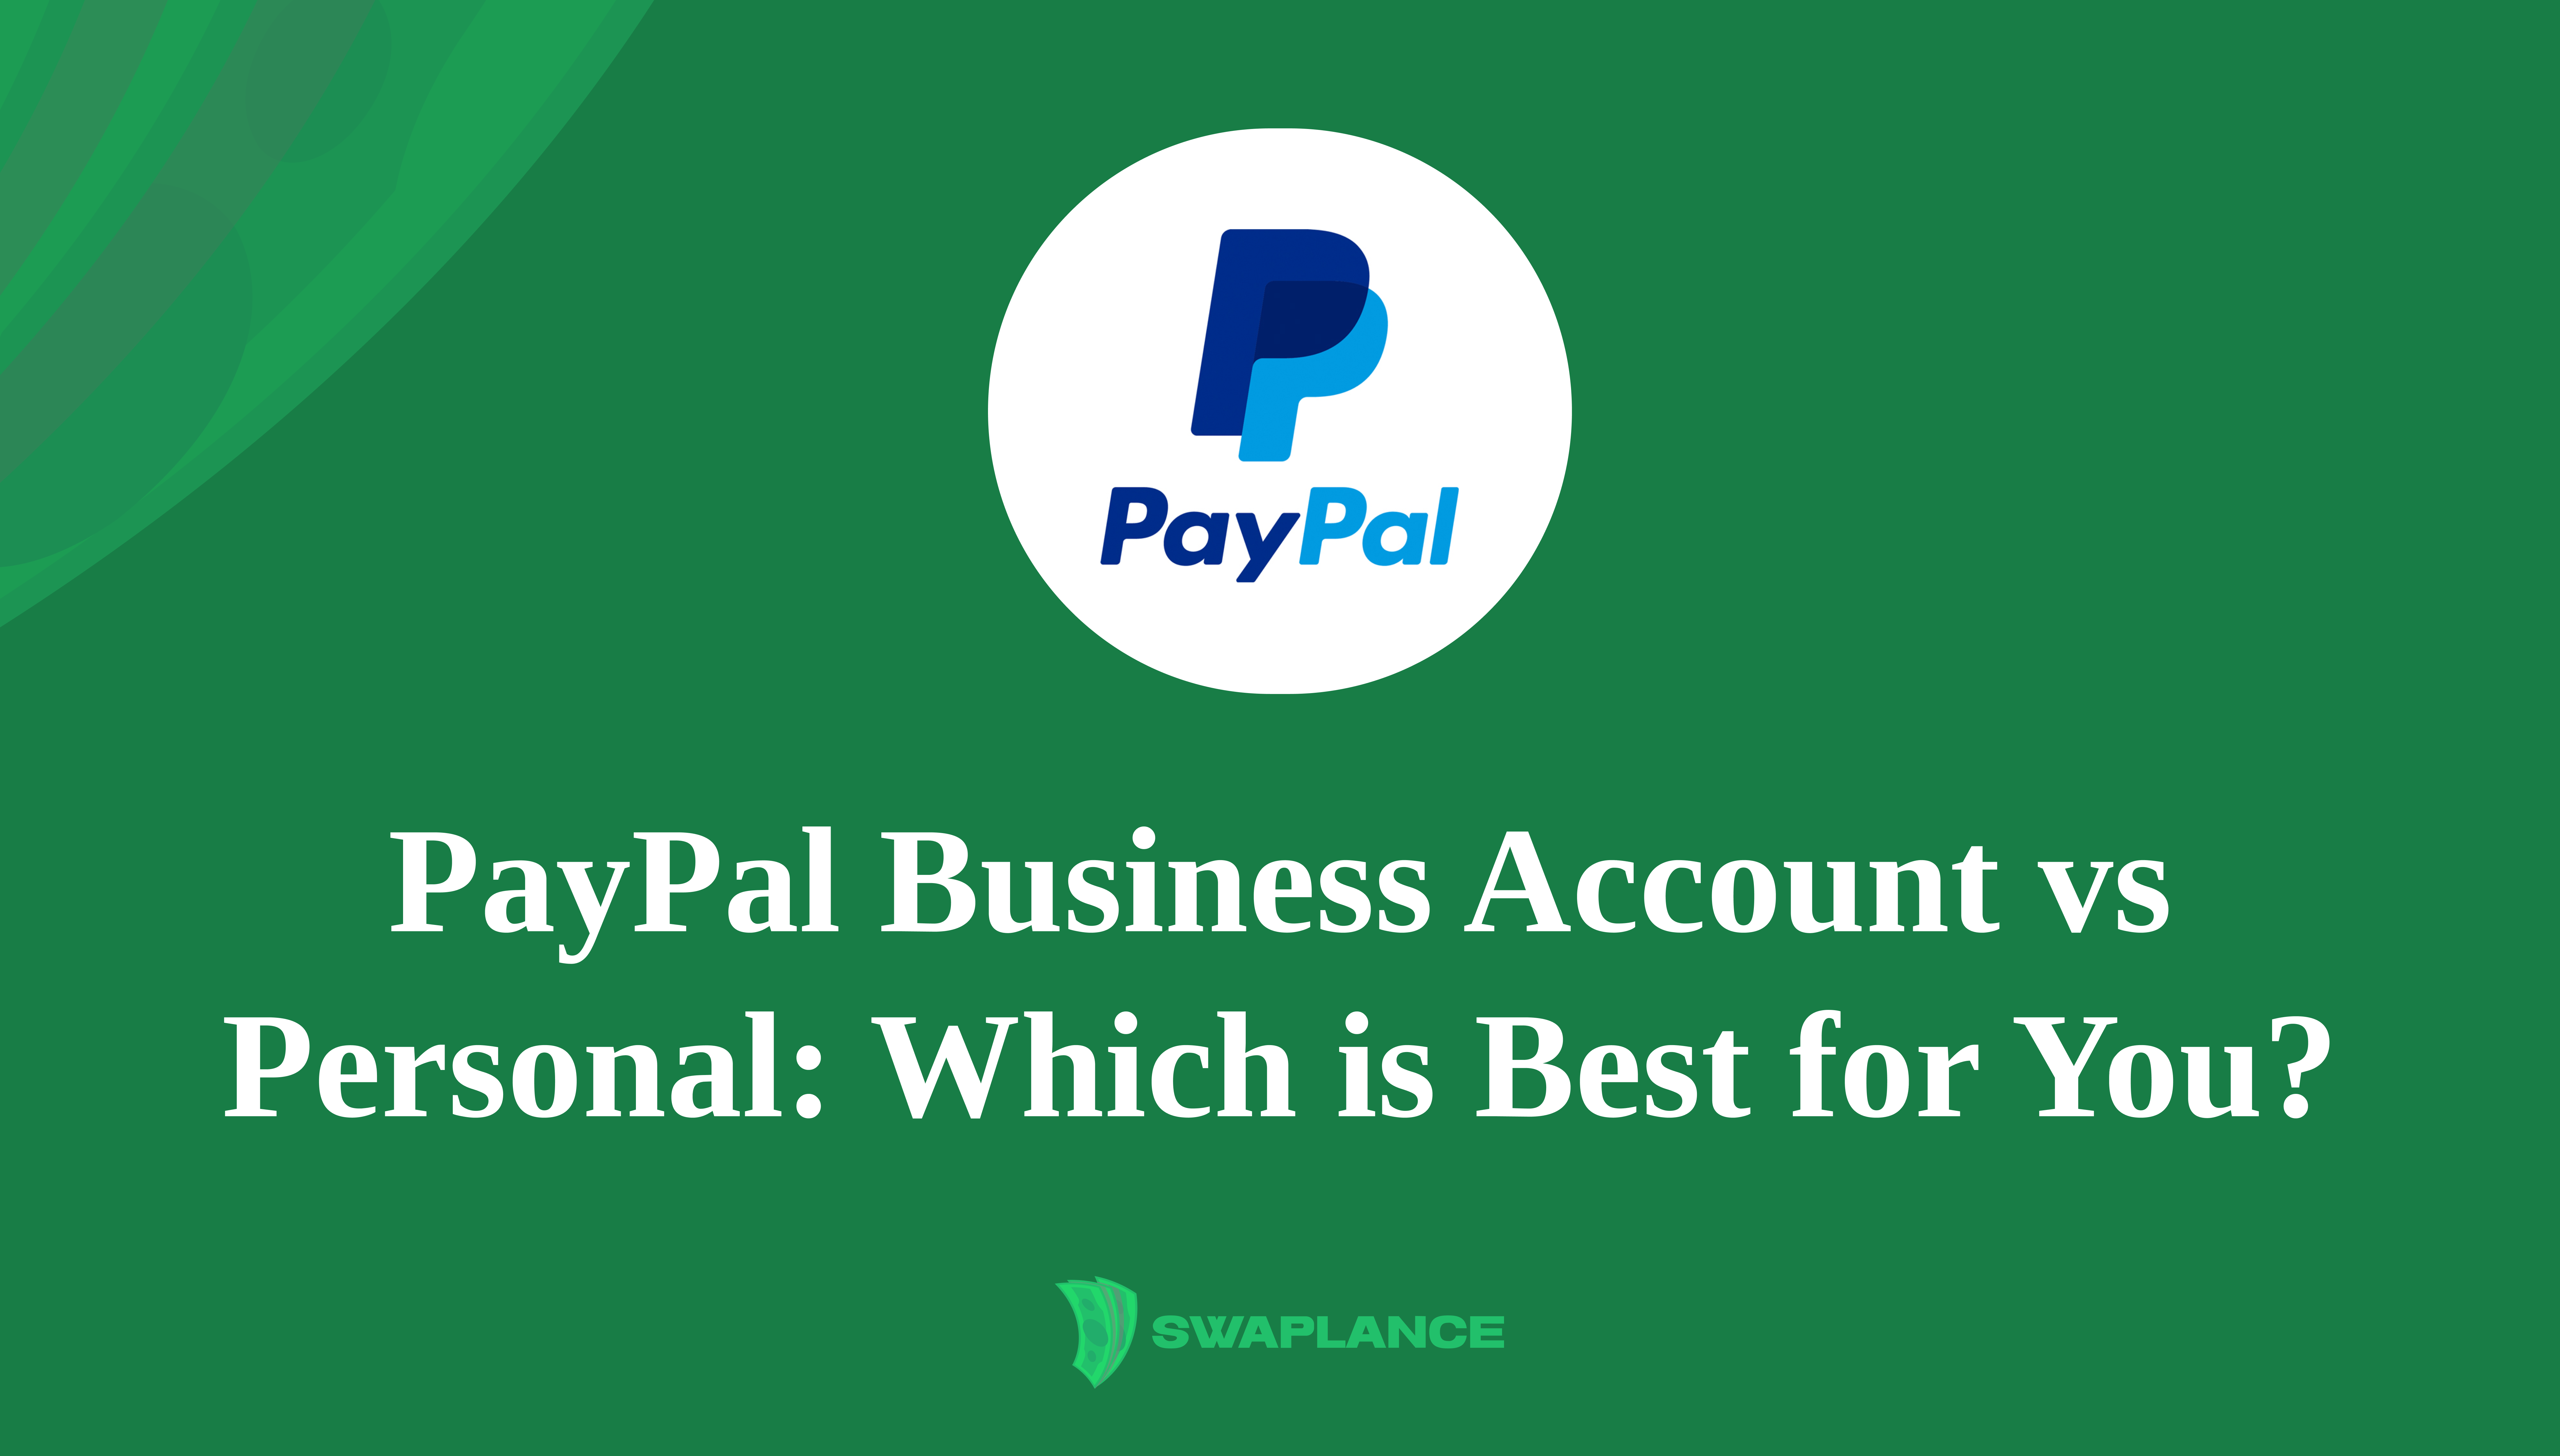 PayPal Business Account vs Personal: Which is Best for You?